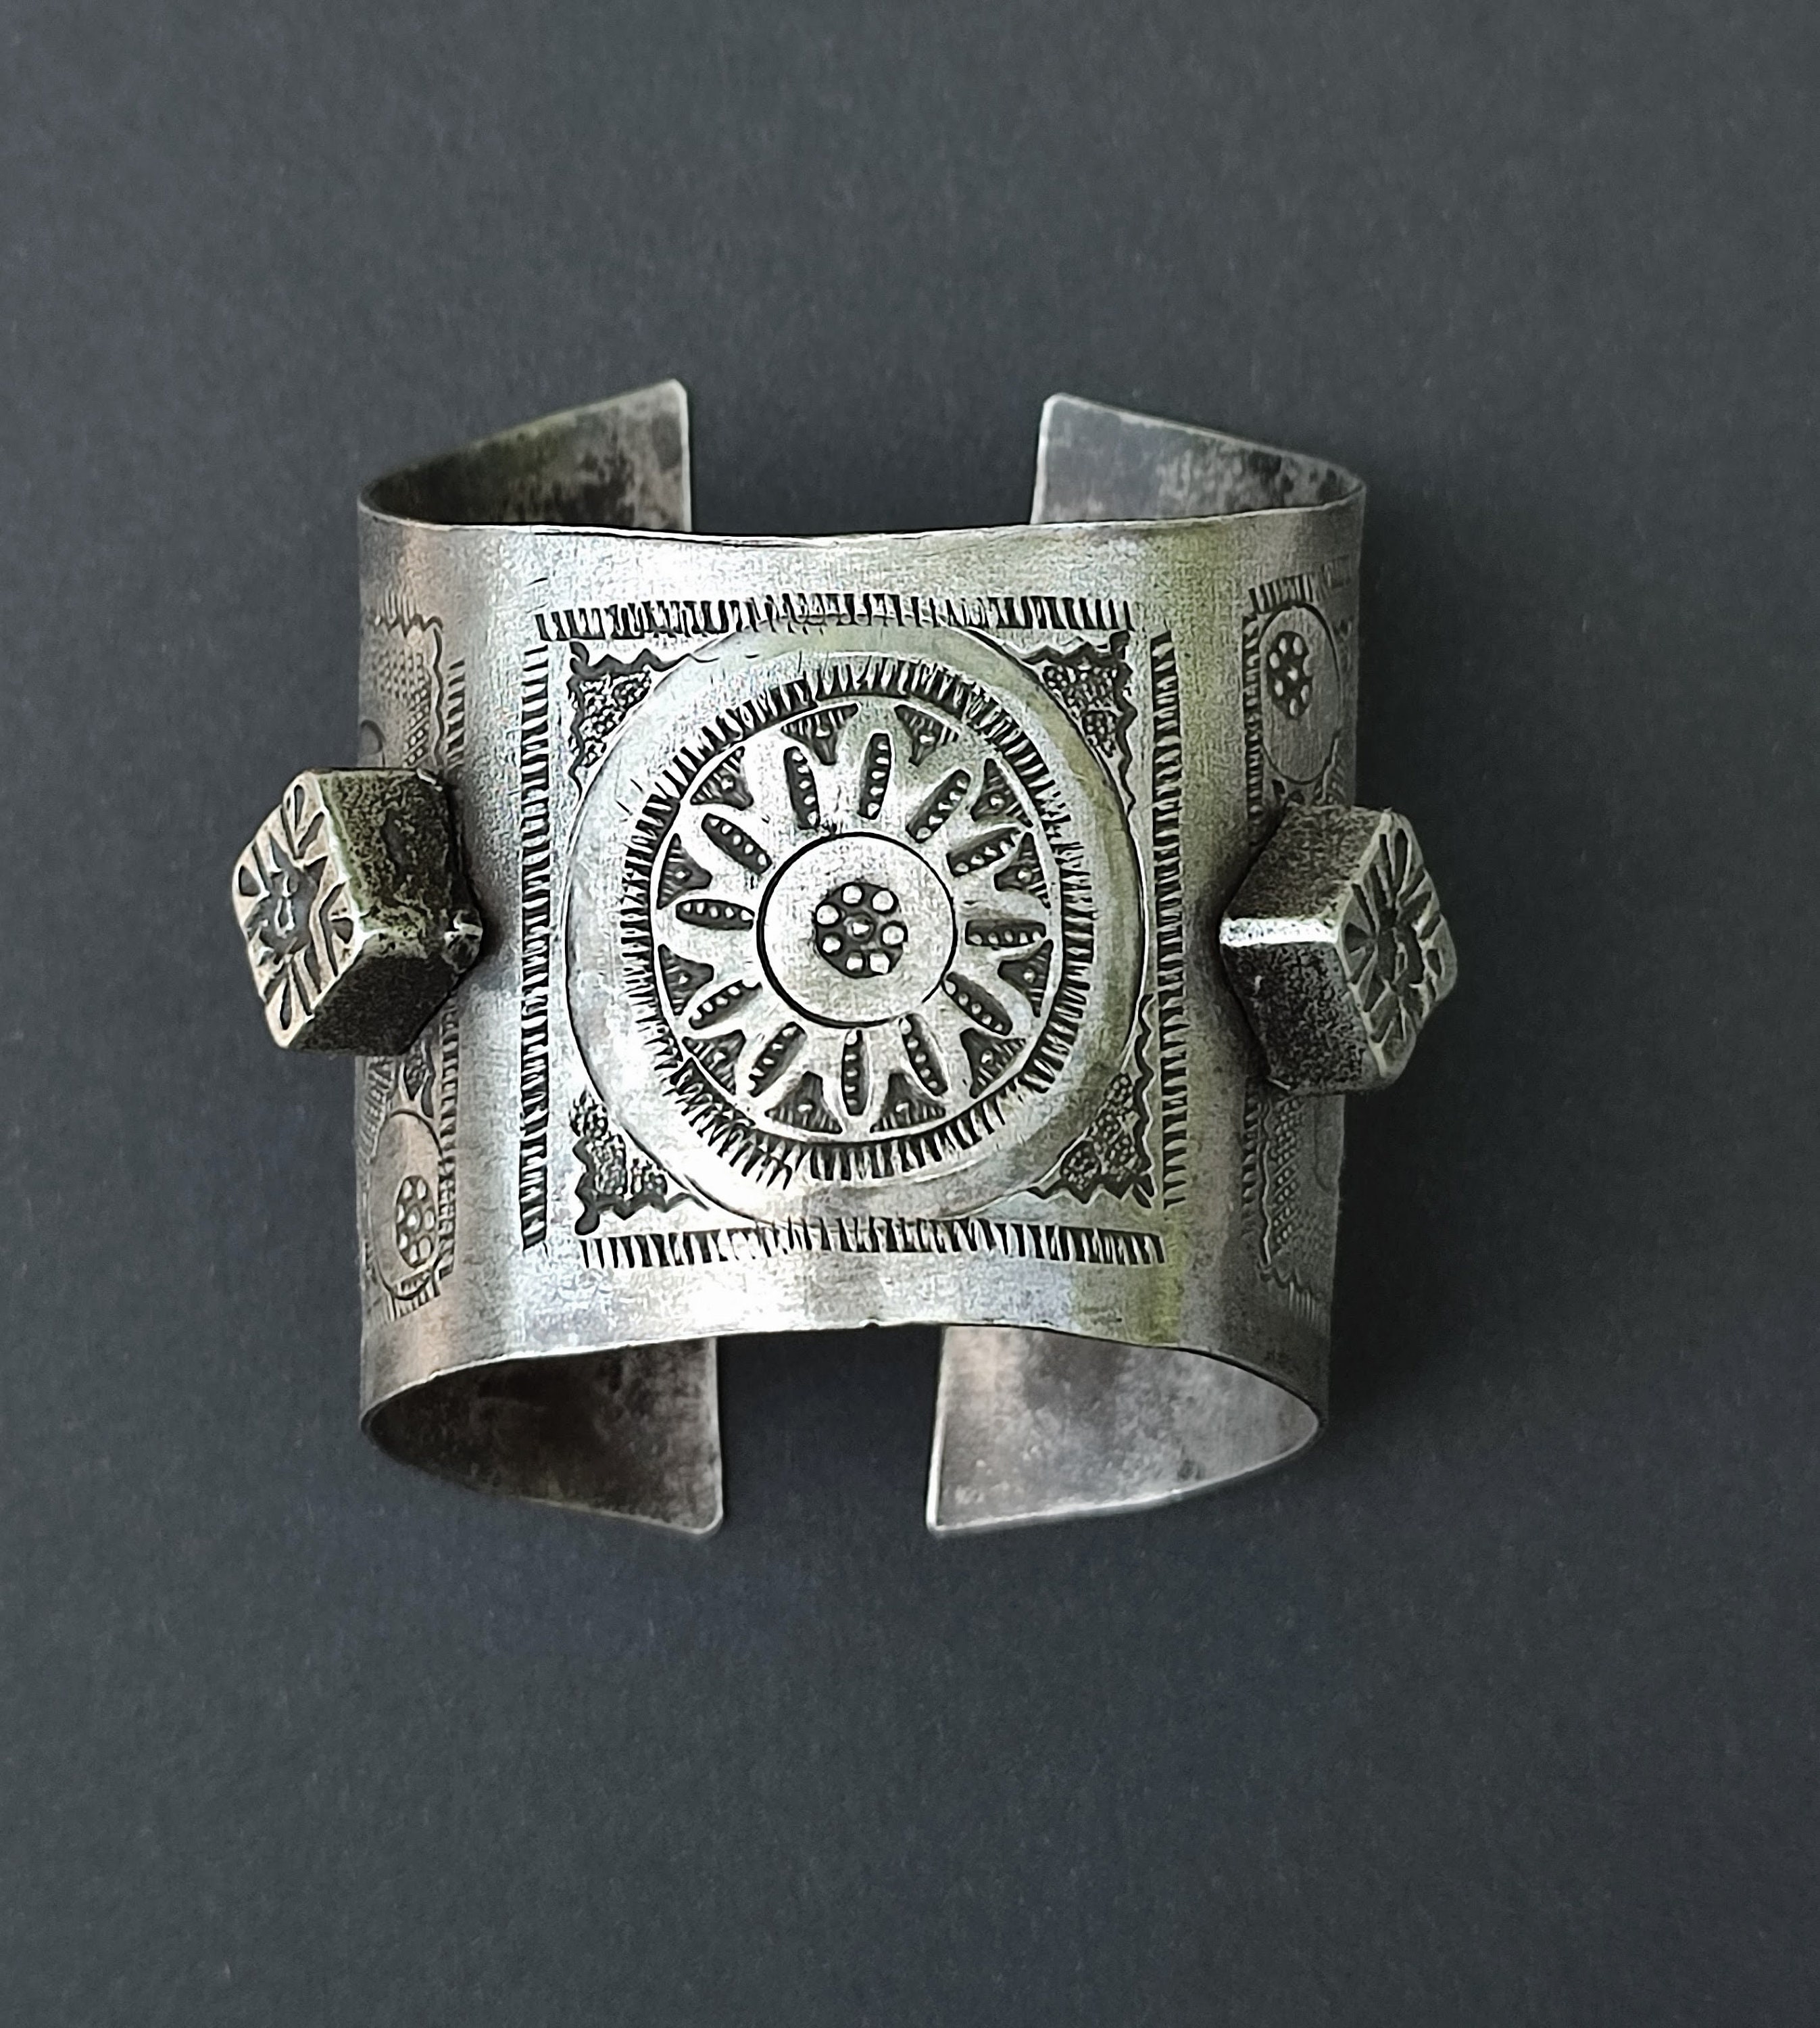 Vintage Egyptian Bedouin Silver Cuff Bracelet with Charms - campestre ...